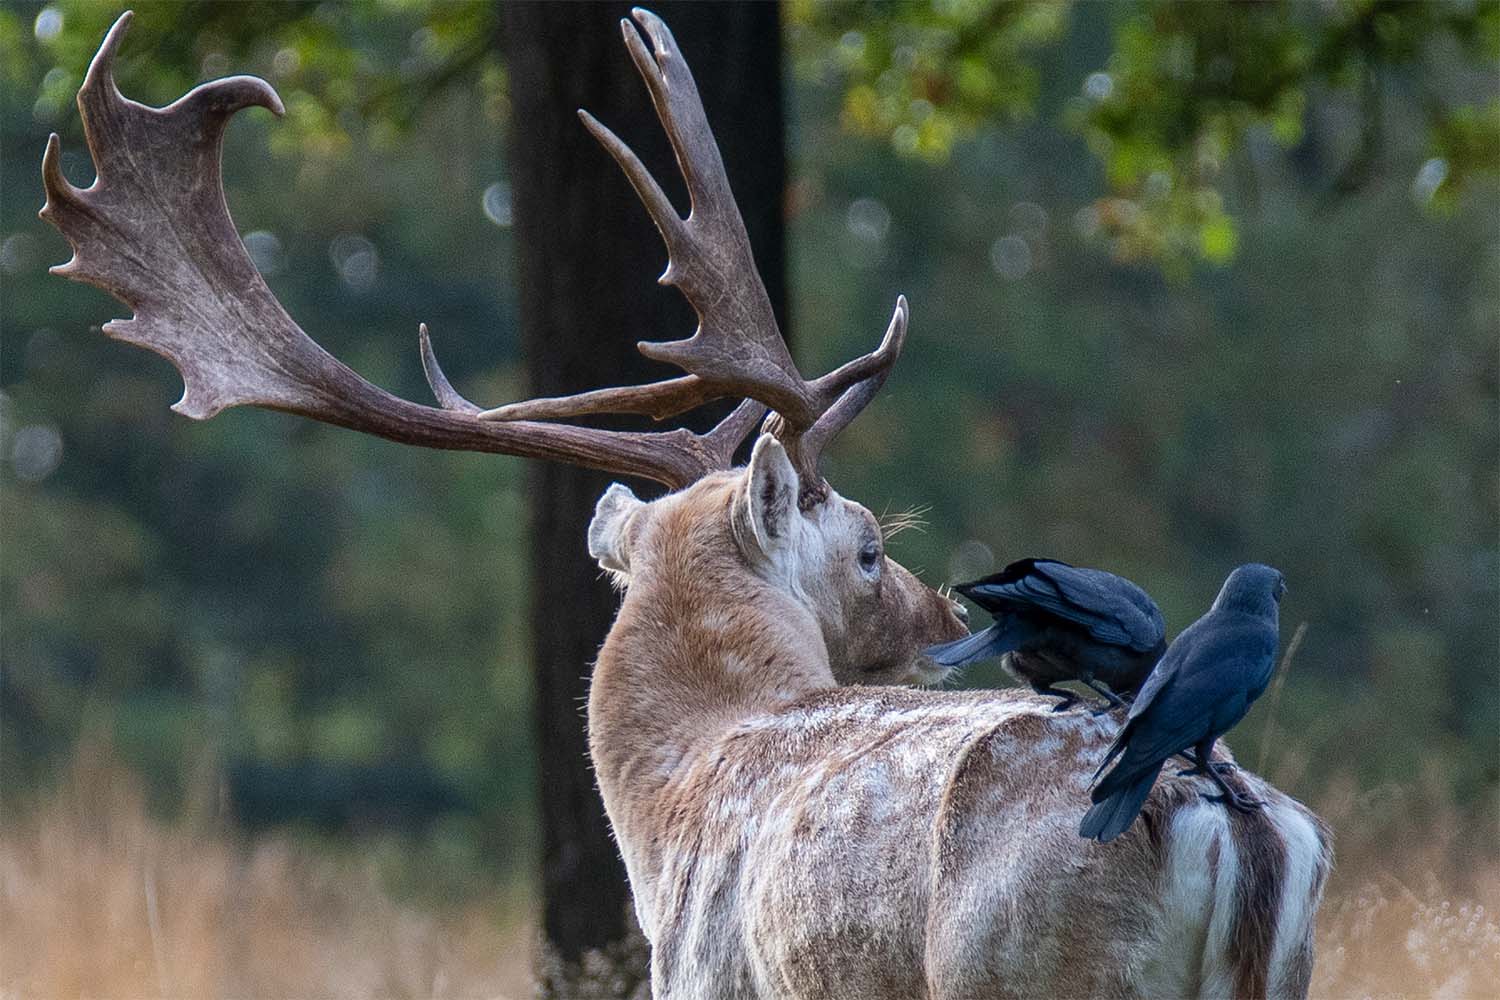 Red deer and jackdaws Richmond park